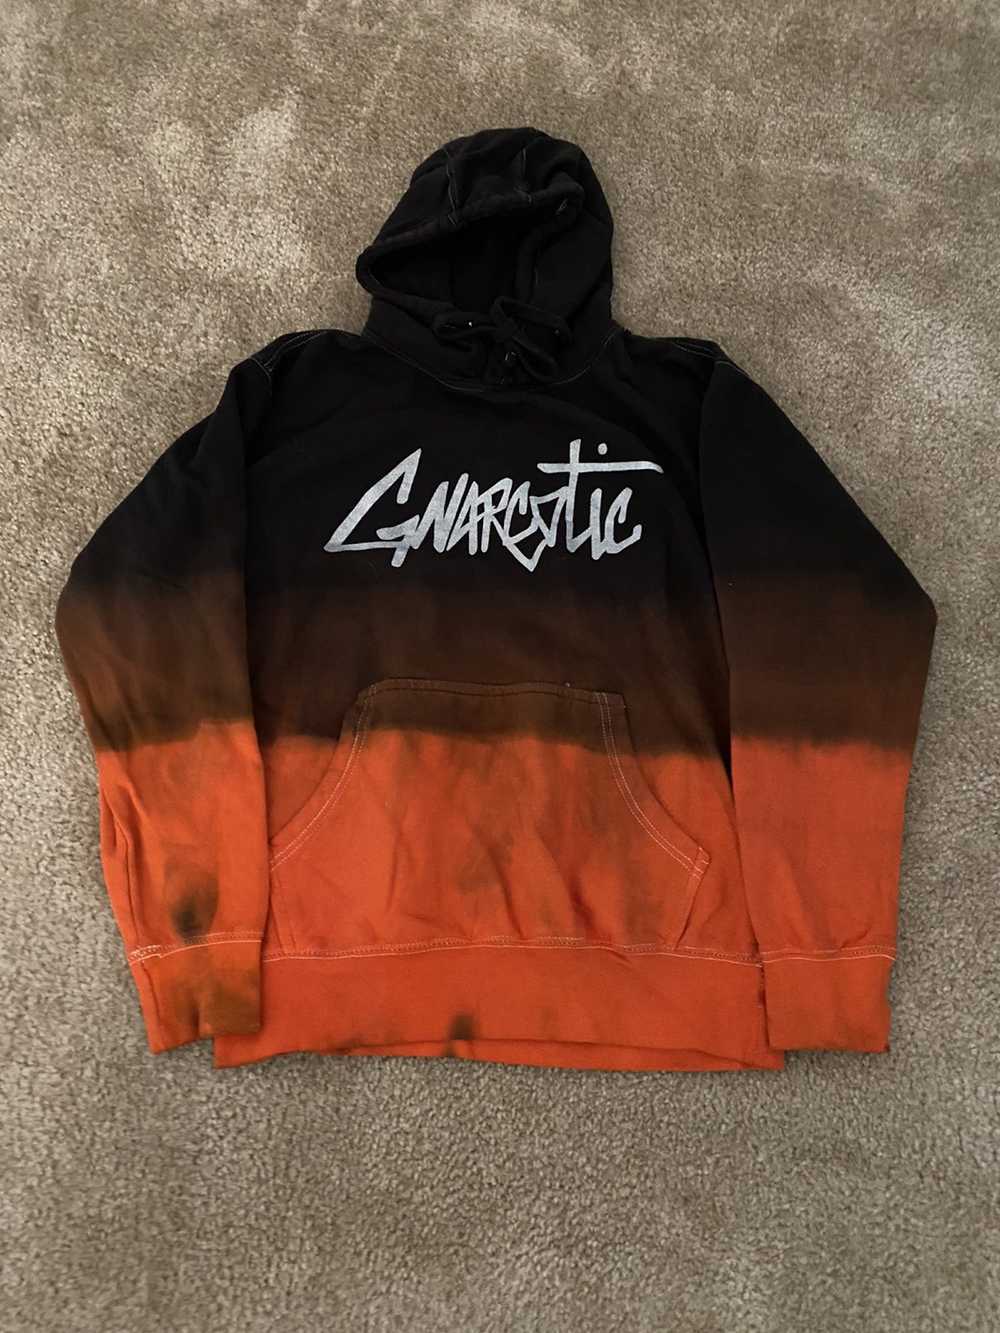 Gnarcotic Gnarcotic Dip Dyed Hoodie SMALL - image 1